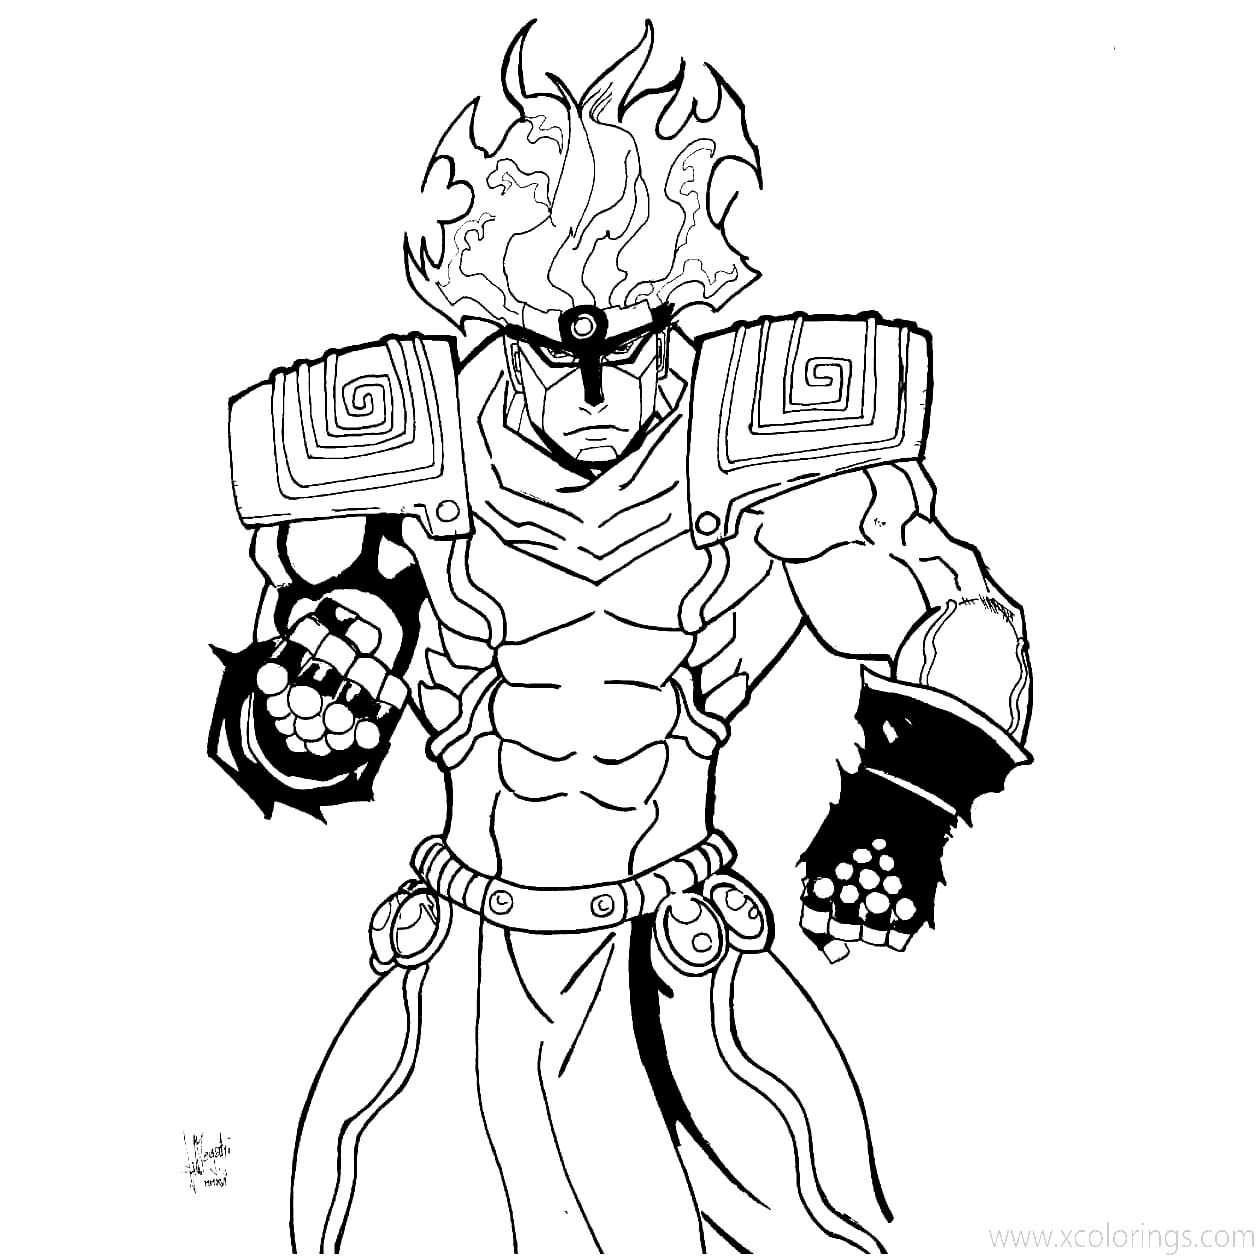 Free Star Platinum from JoJo's Bizarre Adventure Coloring Pages printable